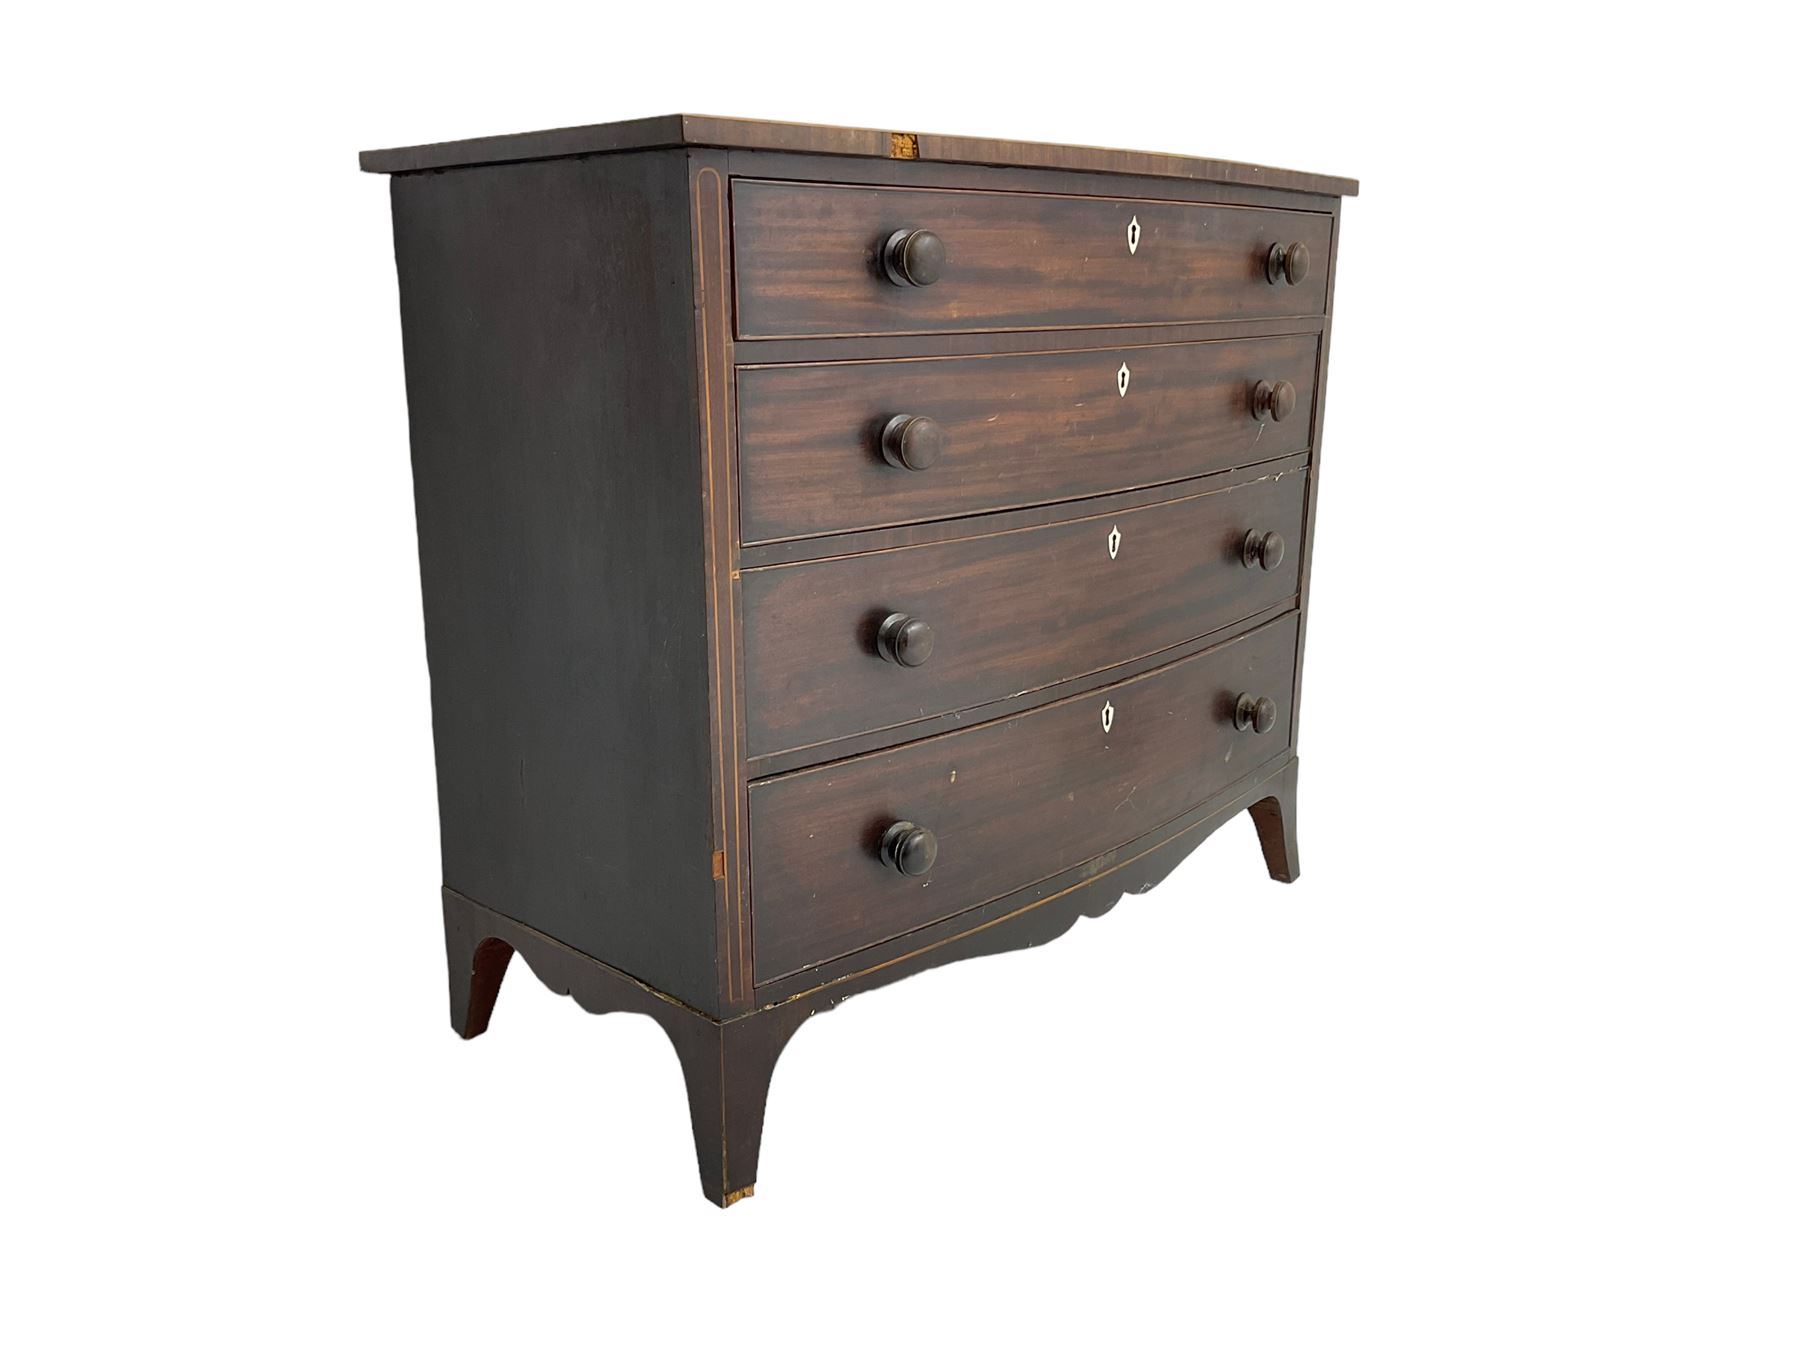 George III mahogany bow-front chest - Image 3 of 10